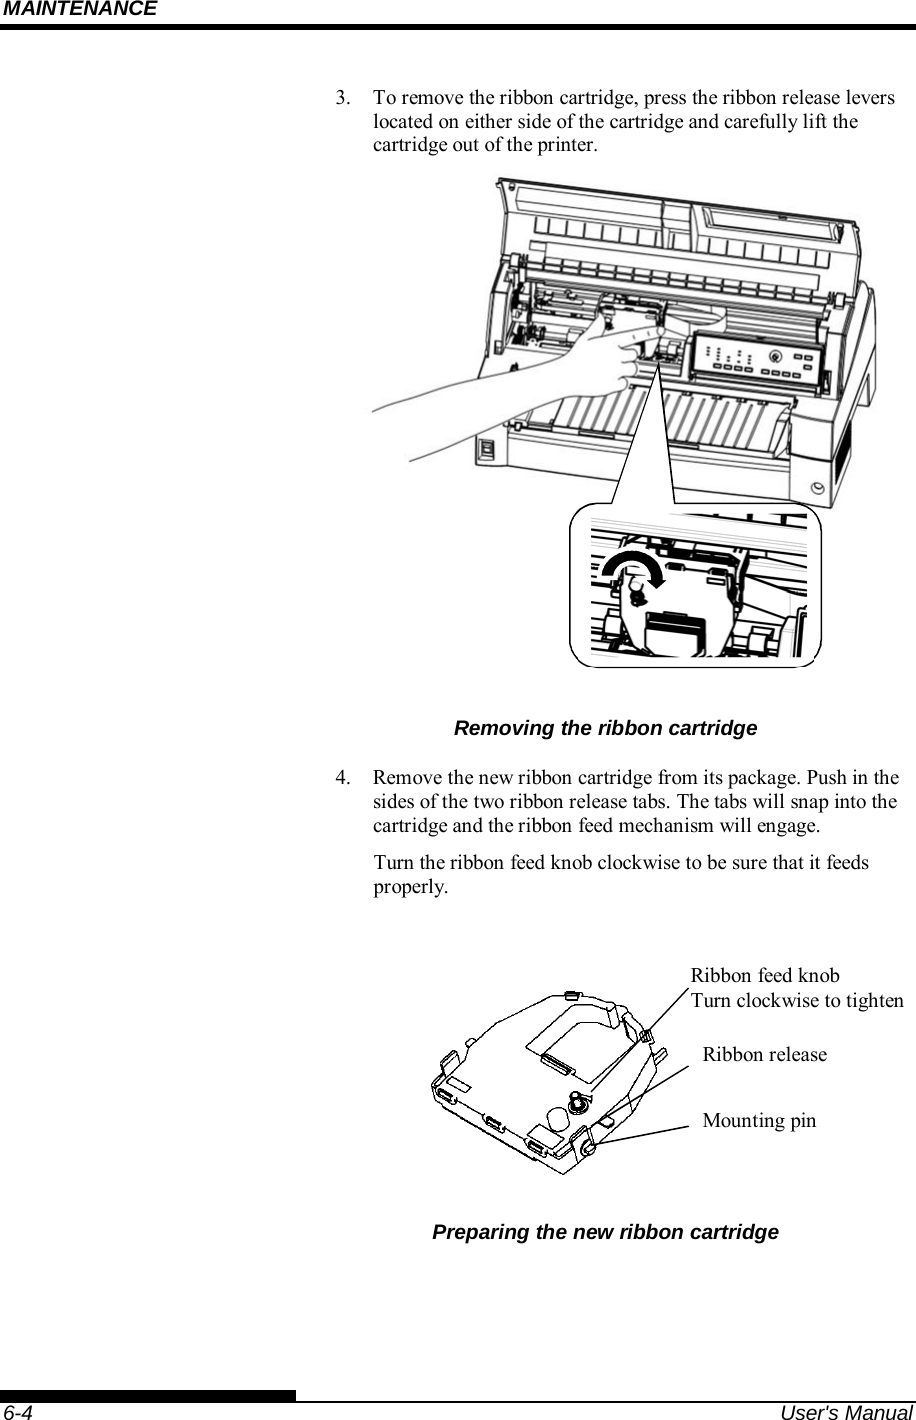 MAINTENANCE    6-4  User&apos;s Manual 3.  To remove the ribbon cartridge, press the ribbon release levers located on either side of the cartridge and carefully lift the cartridge out of the printer.  Removing the ribbon cartridge 4.  Remove the new ribbon cartridge from its package. Push in the sides of the two ribbon release tabs. The tabs will snap into the cartridge and the ribbon feed mechanism will engage. Turn the ribbon feed knob clockwise to be sure that it feeds properly.   Preparing the new ribbon cartridge Ribbon feed knob Turn clockwise to tighten Ribbon release Mounting pin 